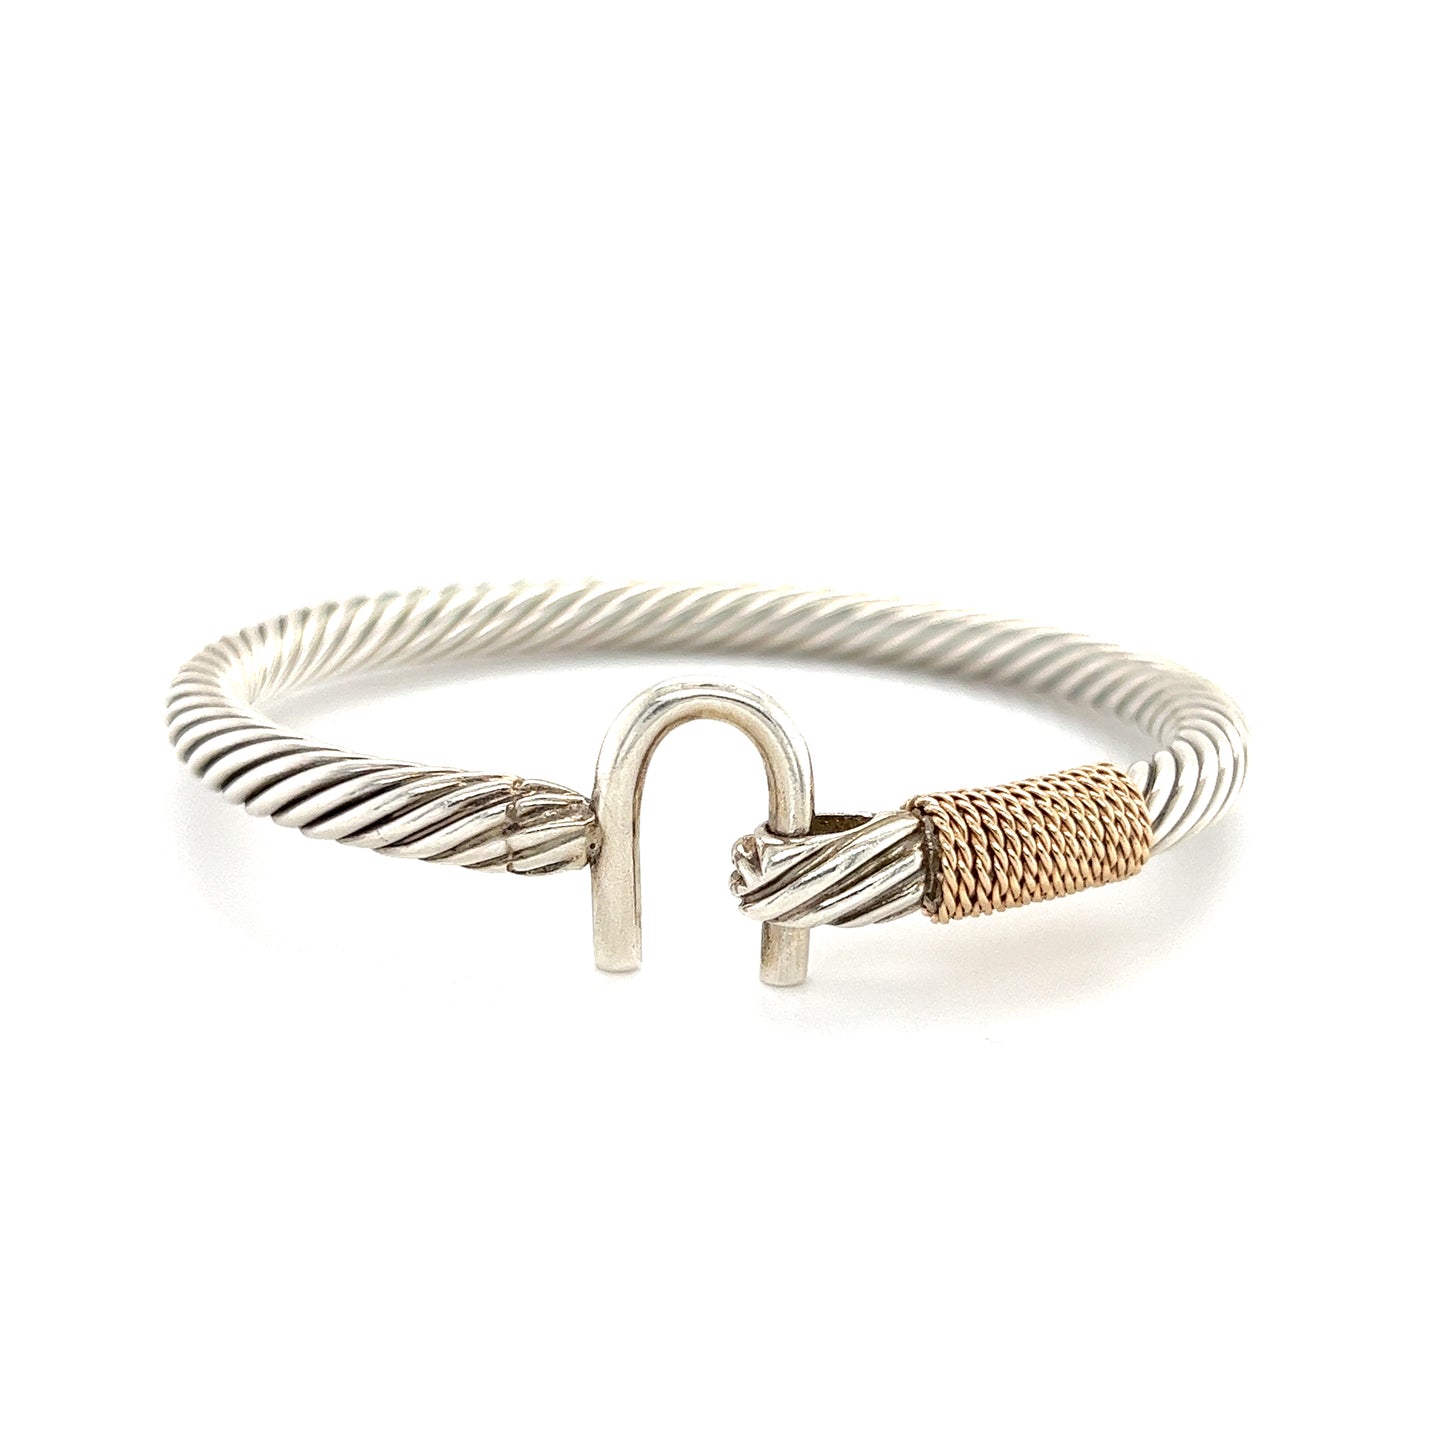 U Cable 5mm Bangle Bracelet with 14K Yellow Gold Wrap in Sterling Silver Flat View